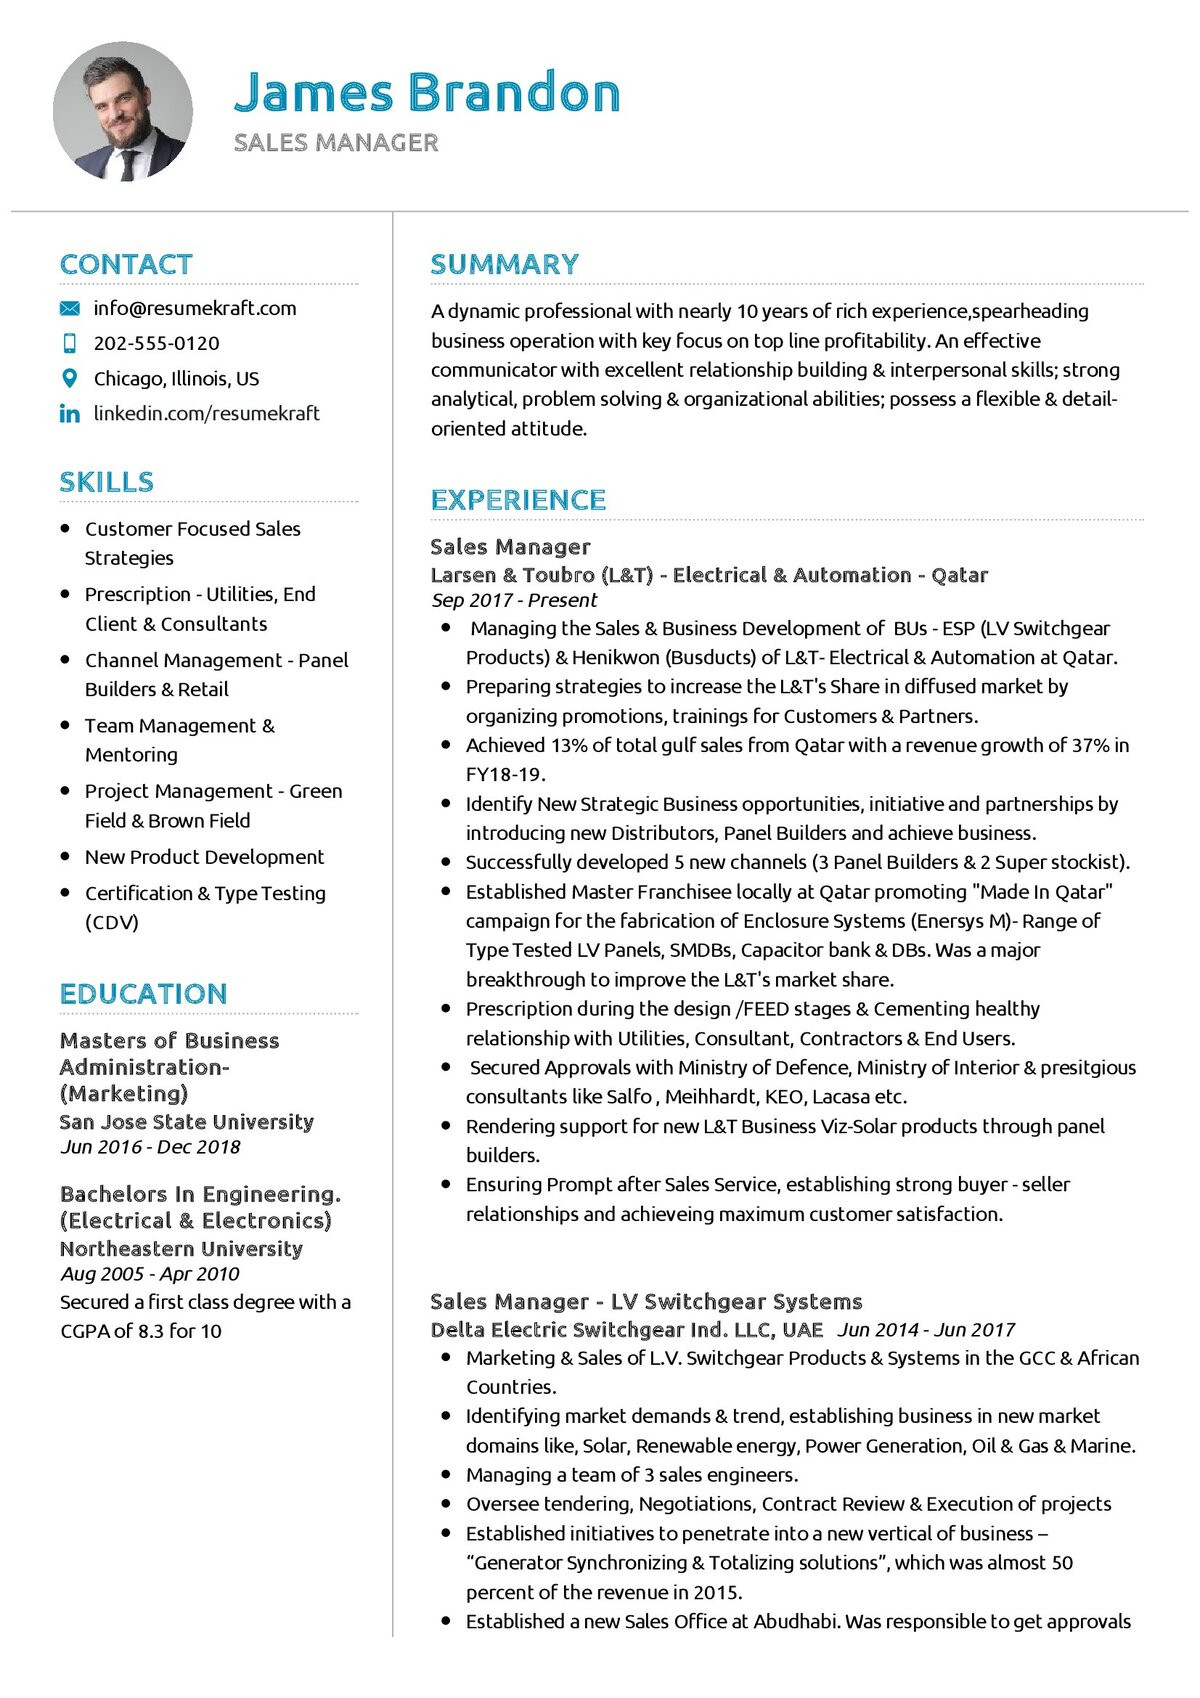 Resume Summary Samples for A Sales Manager Sales Manager Cv Example 2022 Writing Tips – Resumekraft